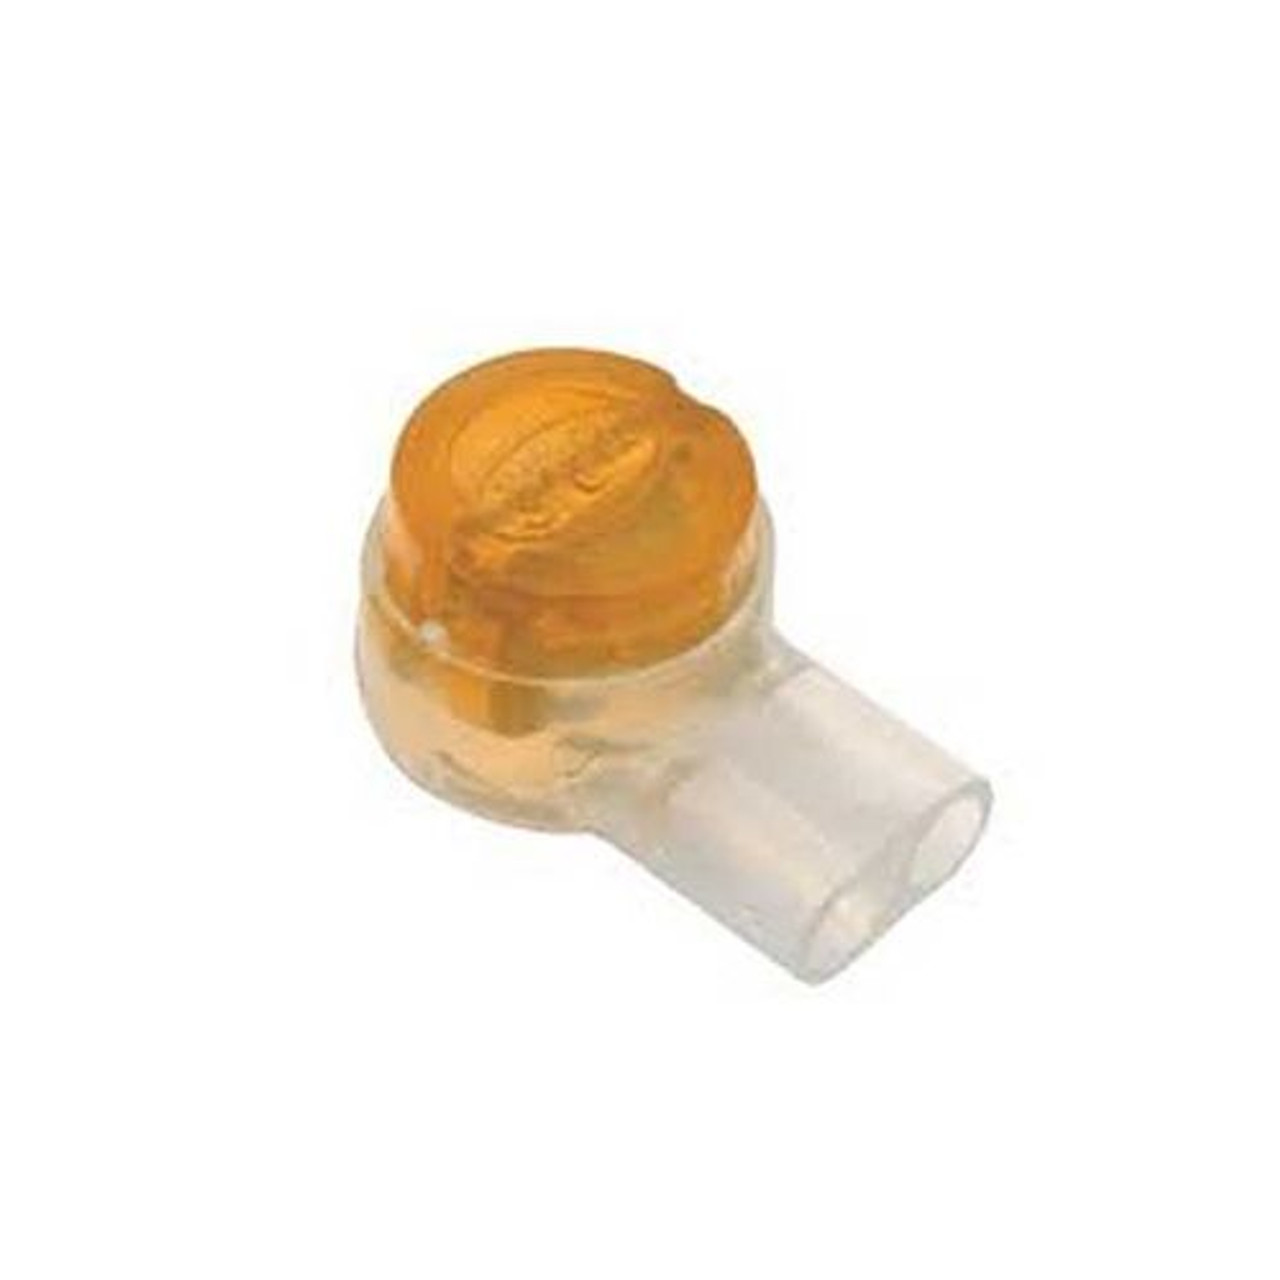 Steren 300-071 UY Connector 100 Pack Yellow 2 Wire Butt IDC Splice Telephone Gel-Filled Insulated Displacement Contact 3M Type 22 - 26 AWG Modular Telephone Wire Conductor Data Signal Cable Squeeze Crimp Audio Connectors, Part # 300071